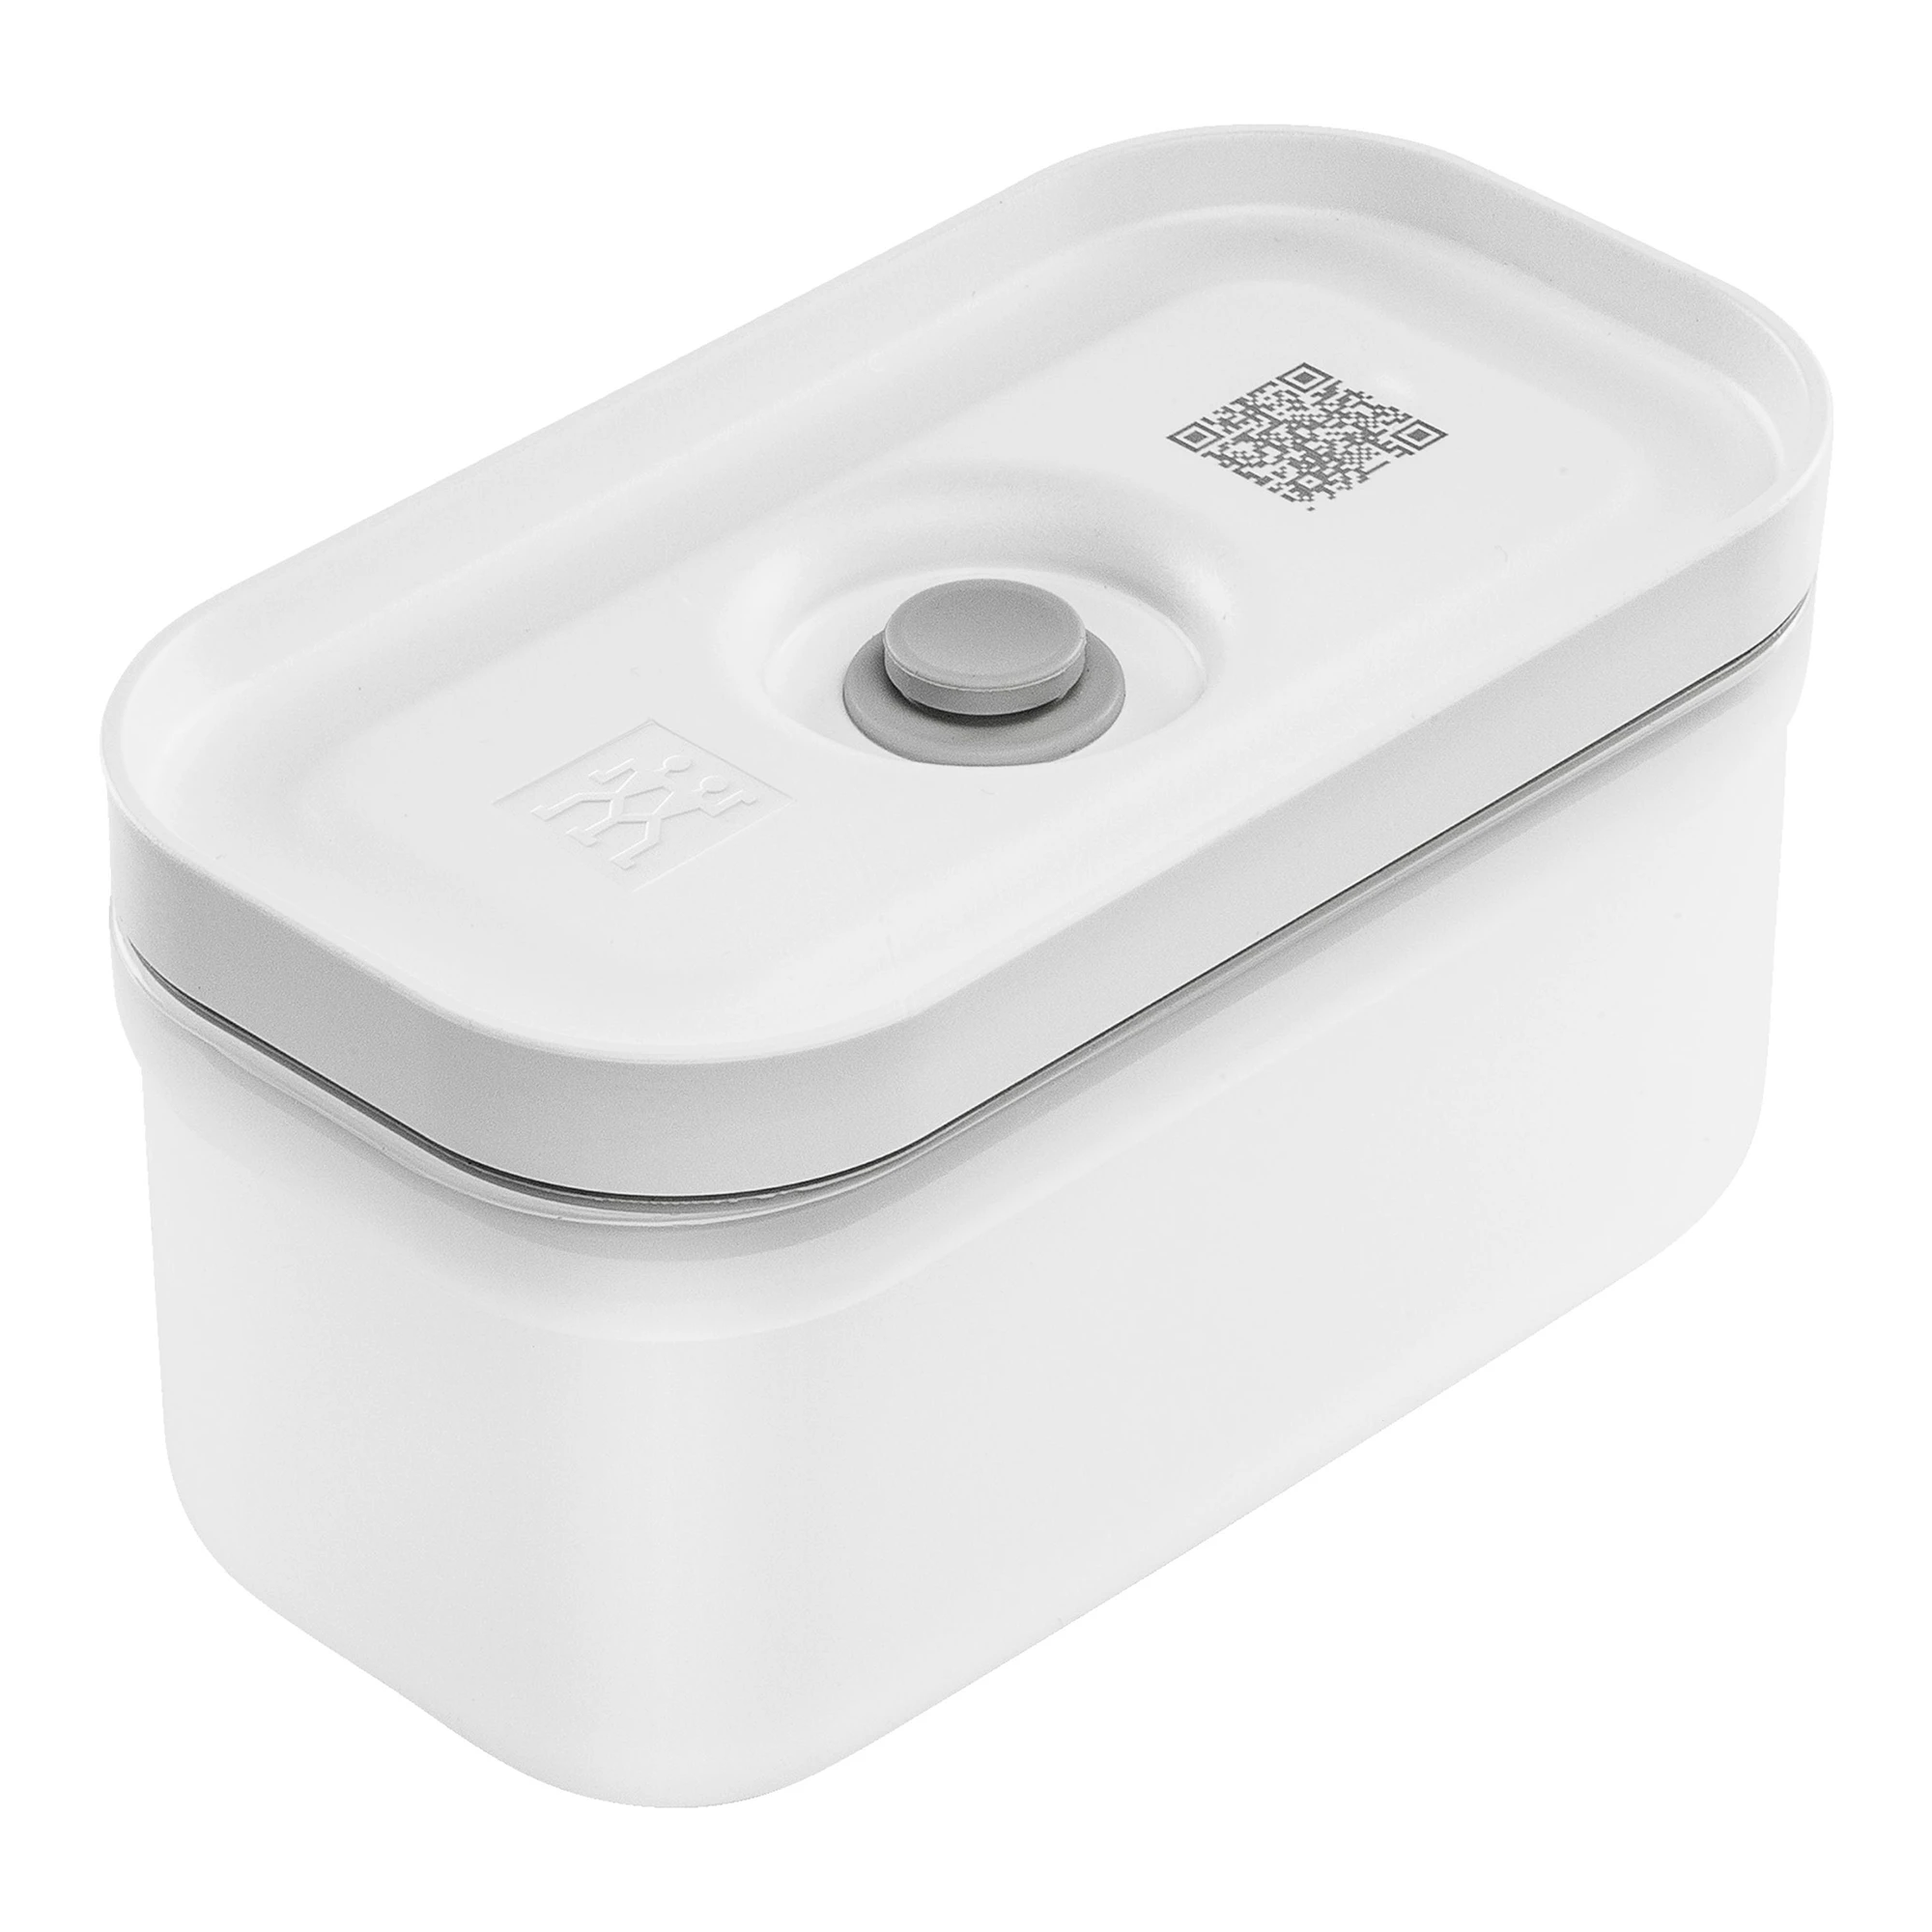 https://www.homethreads.com/files/zwilling/1009869-zwilling-fresh-save-plastic-lunch-box-airtight-food-storage-container-meal-prep-container-bpa-free-grey-semitransparent-small-7.webp